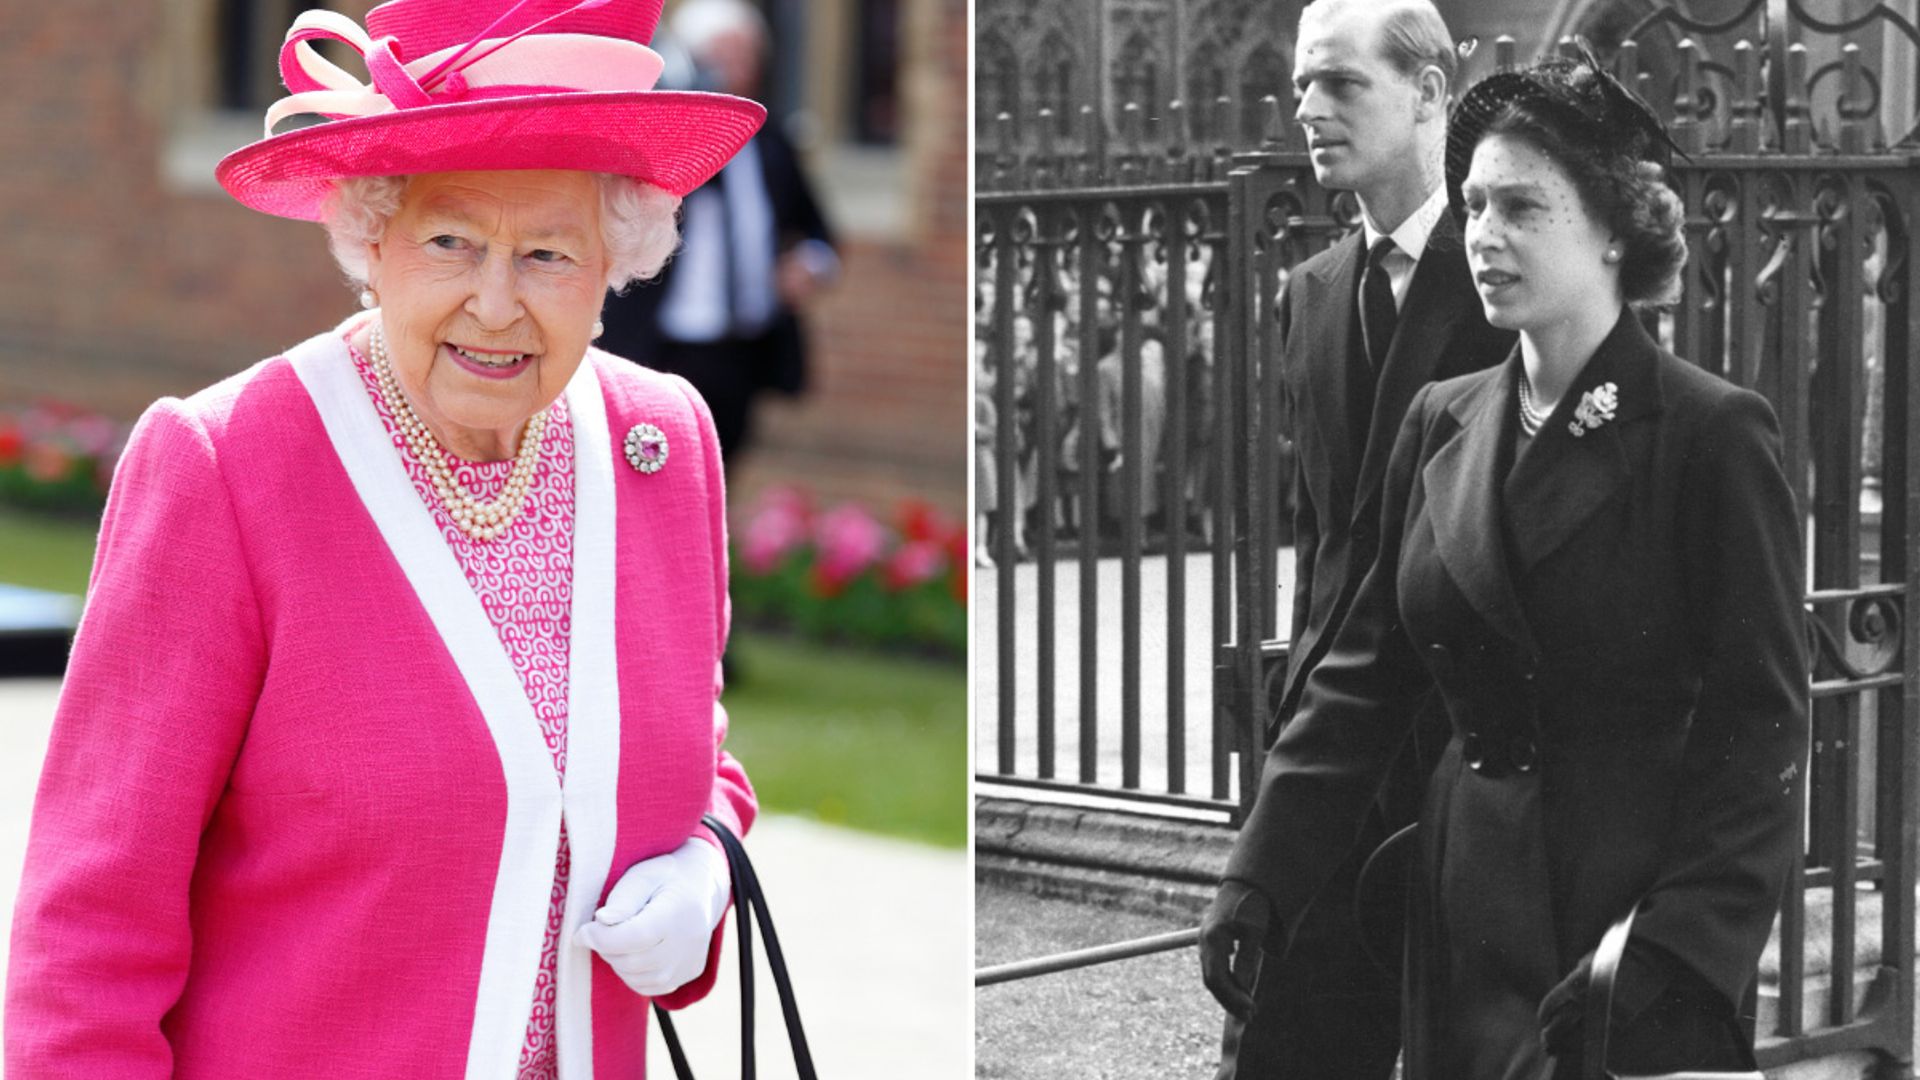 The Queen's first marital home was nothing like Buckingham Palace